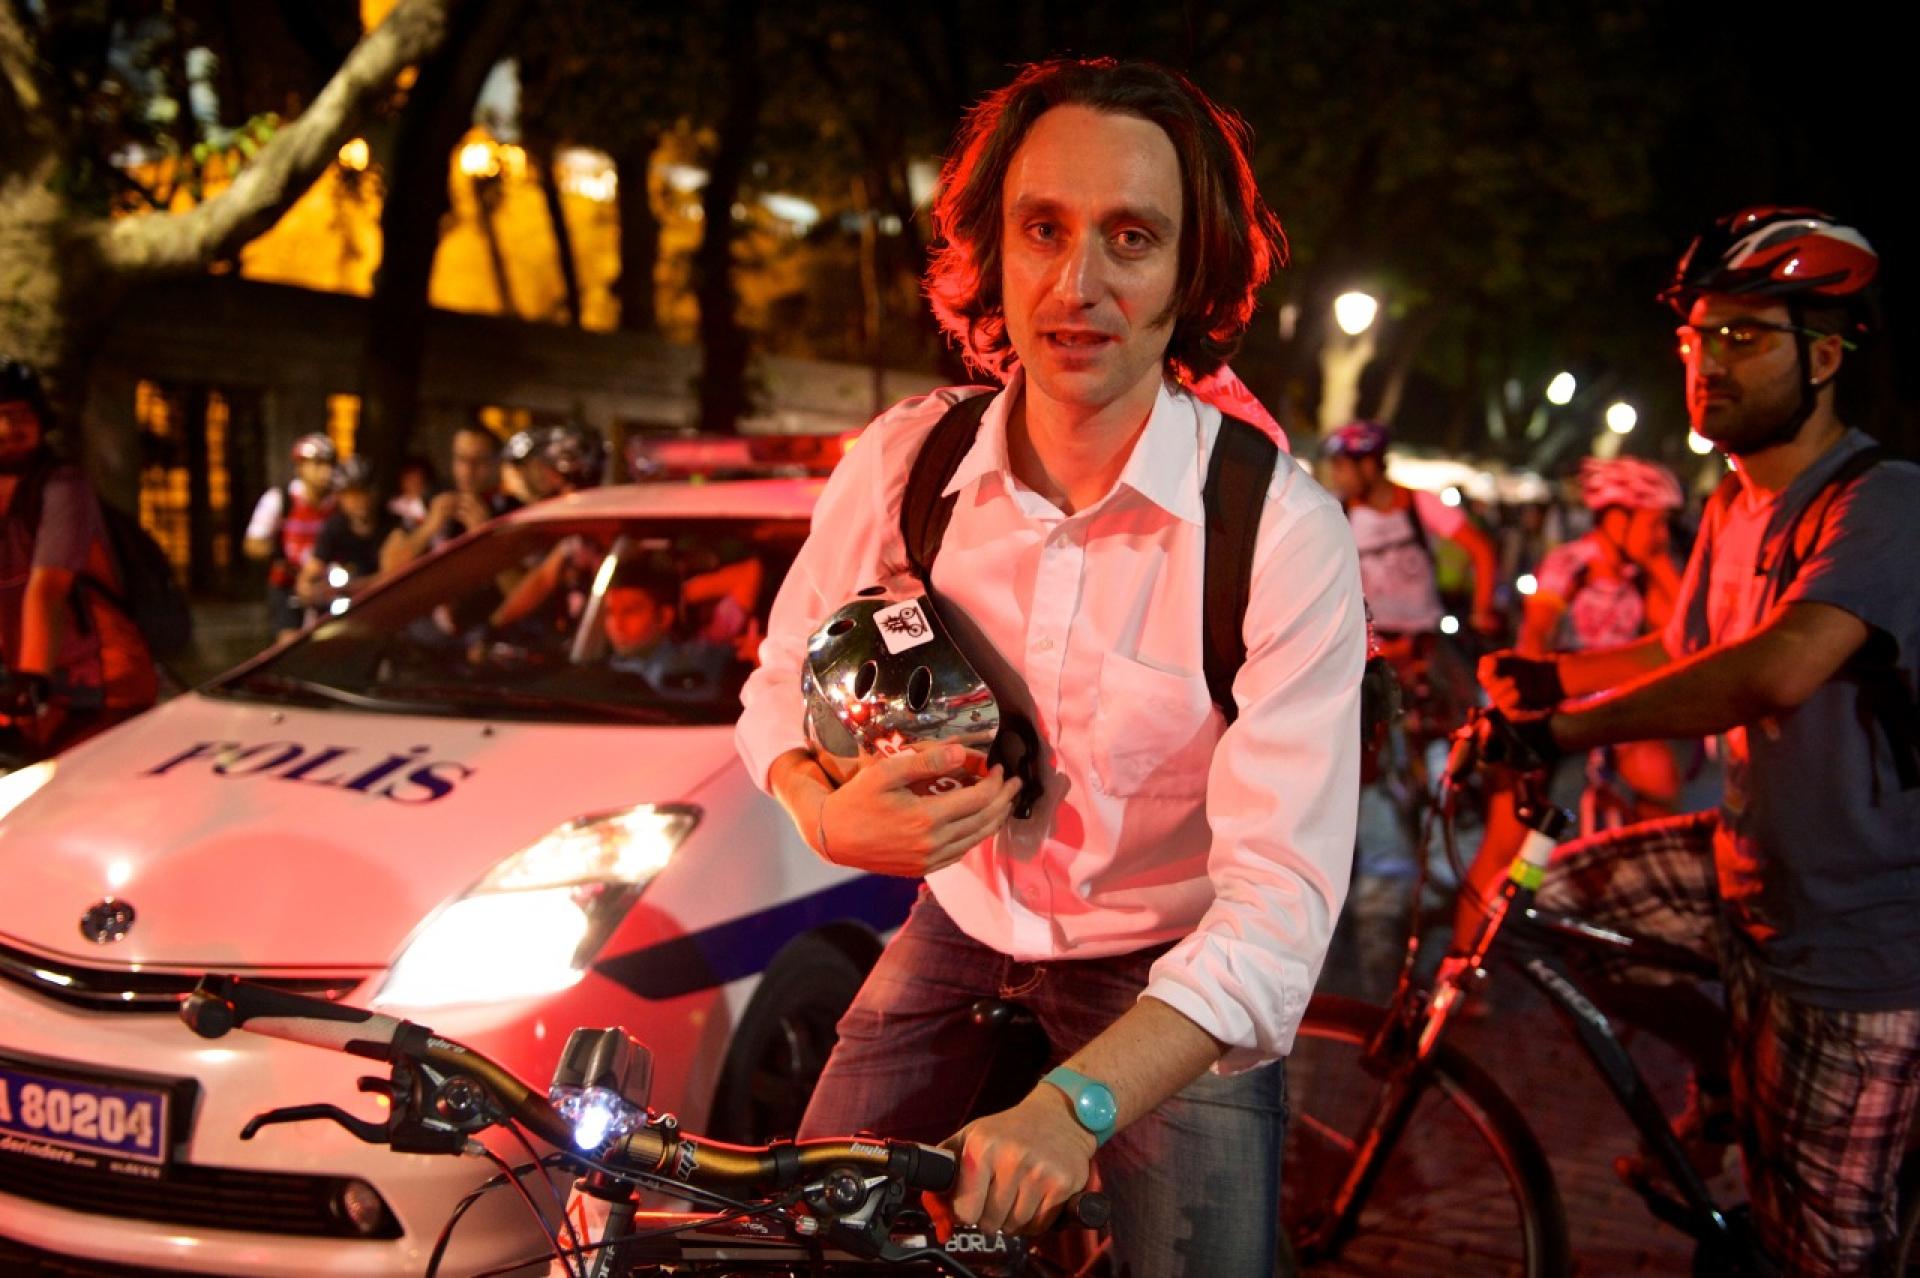 Velonotte in Istanbul in 2013; Sergey after the tour, tired but happy.